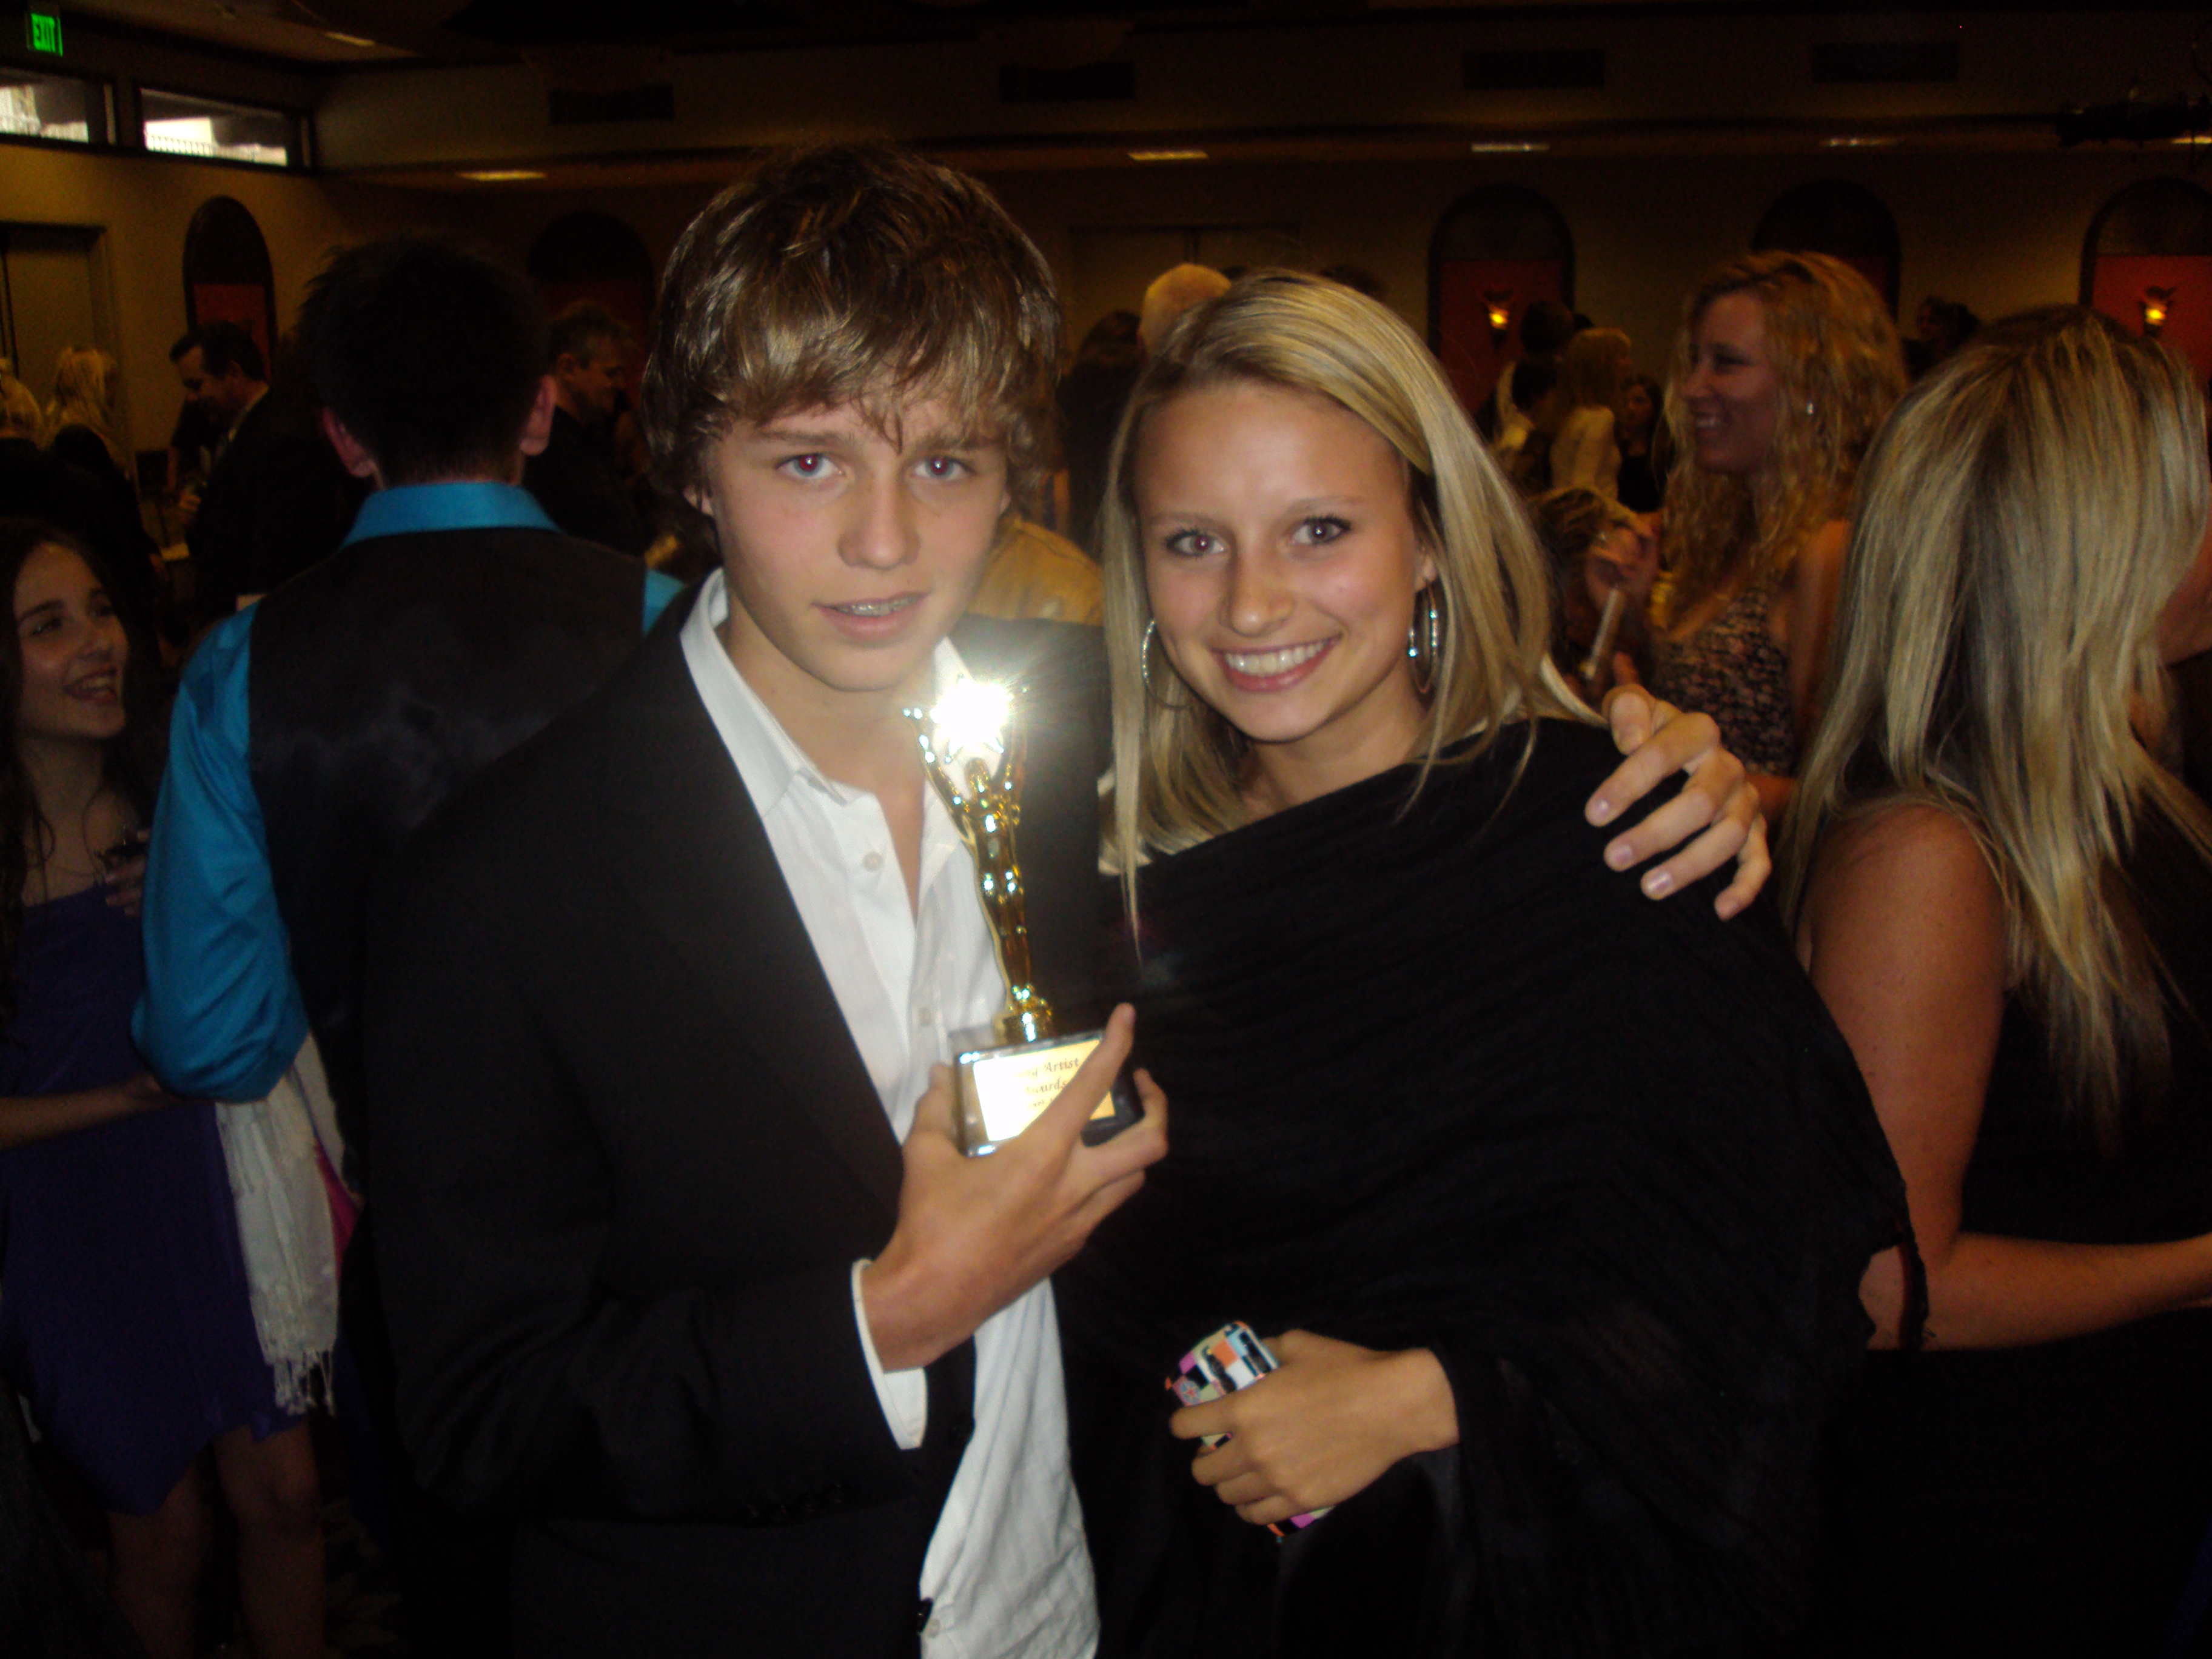 Ty Wood & Taylor Wood at the Young Artist Awards 2010